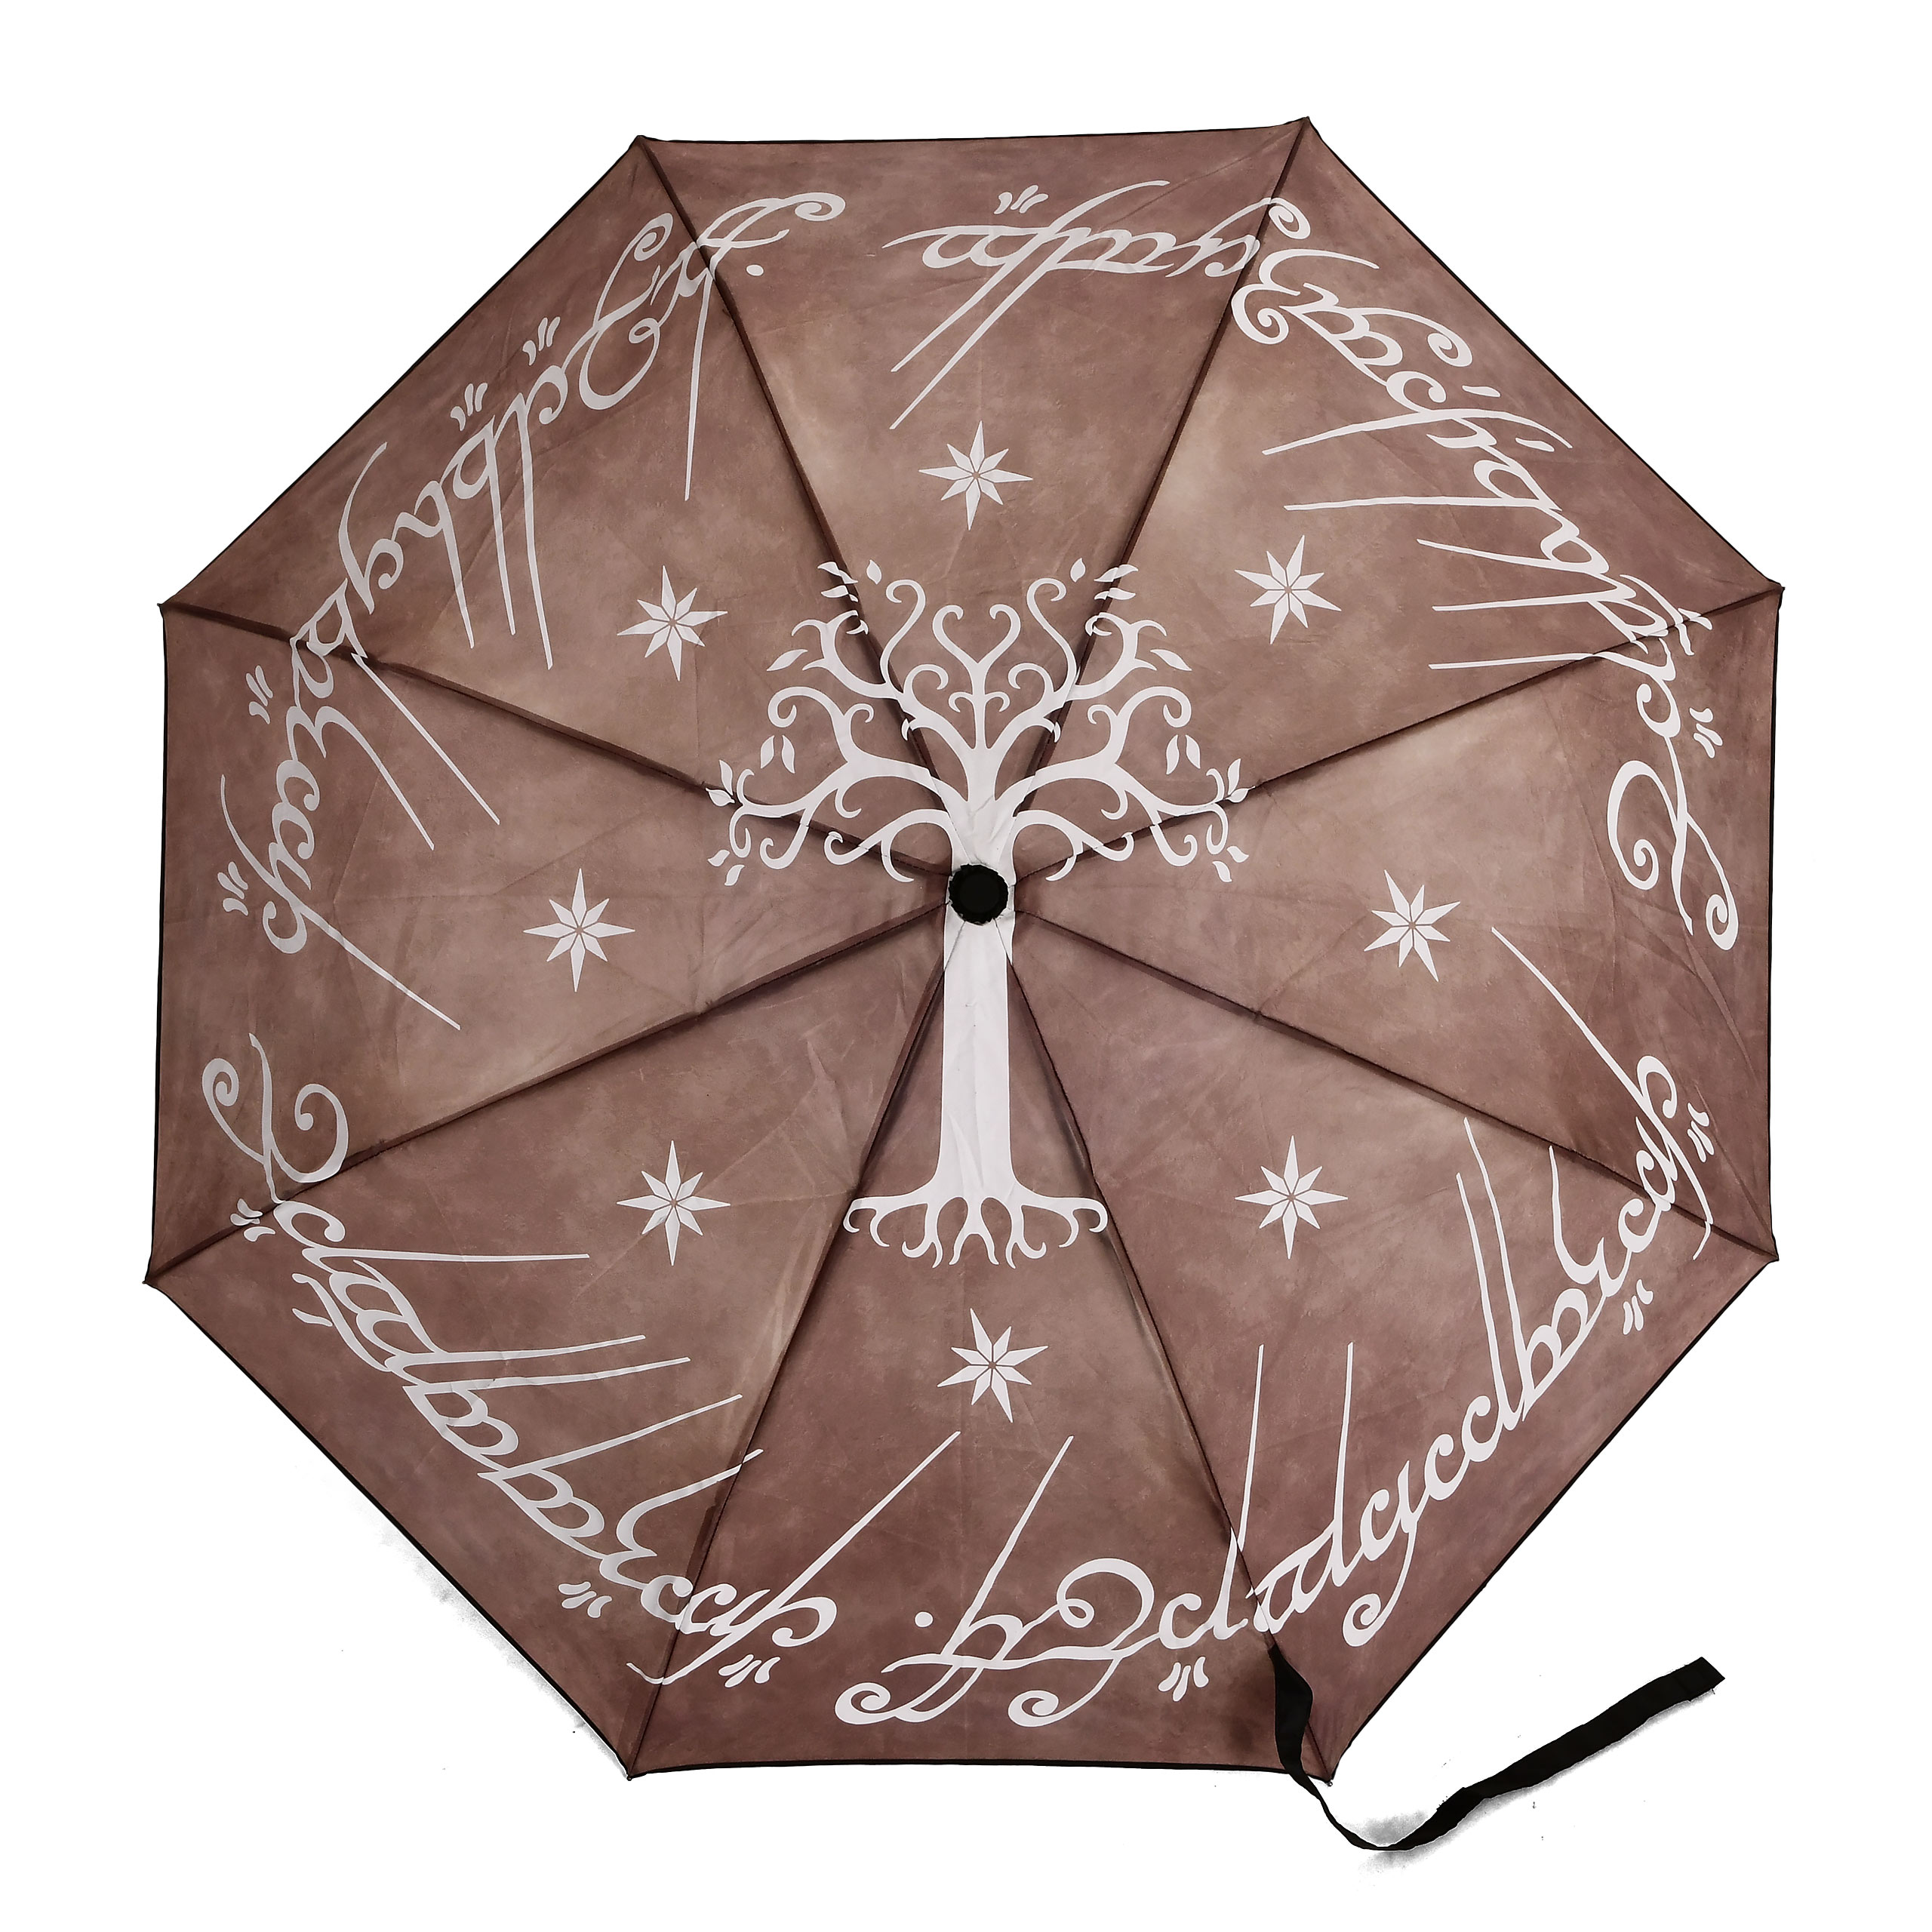 Lord of the Rings - The One Ring Umbrella with Aqua Effect